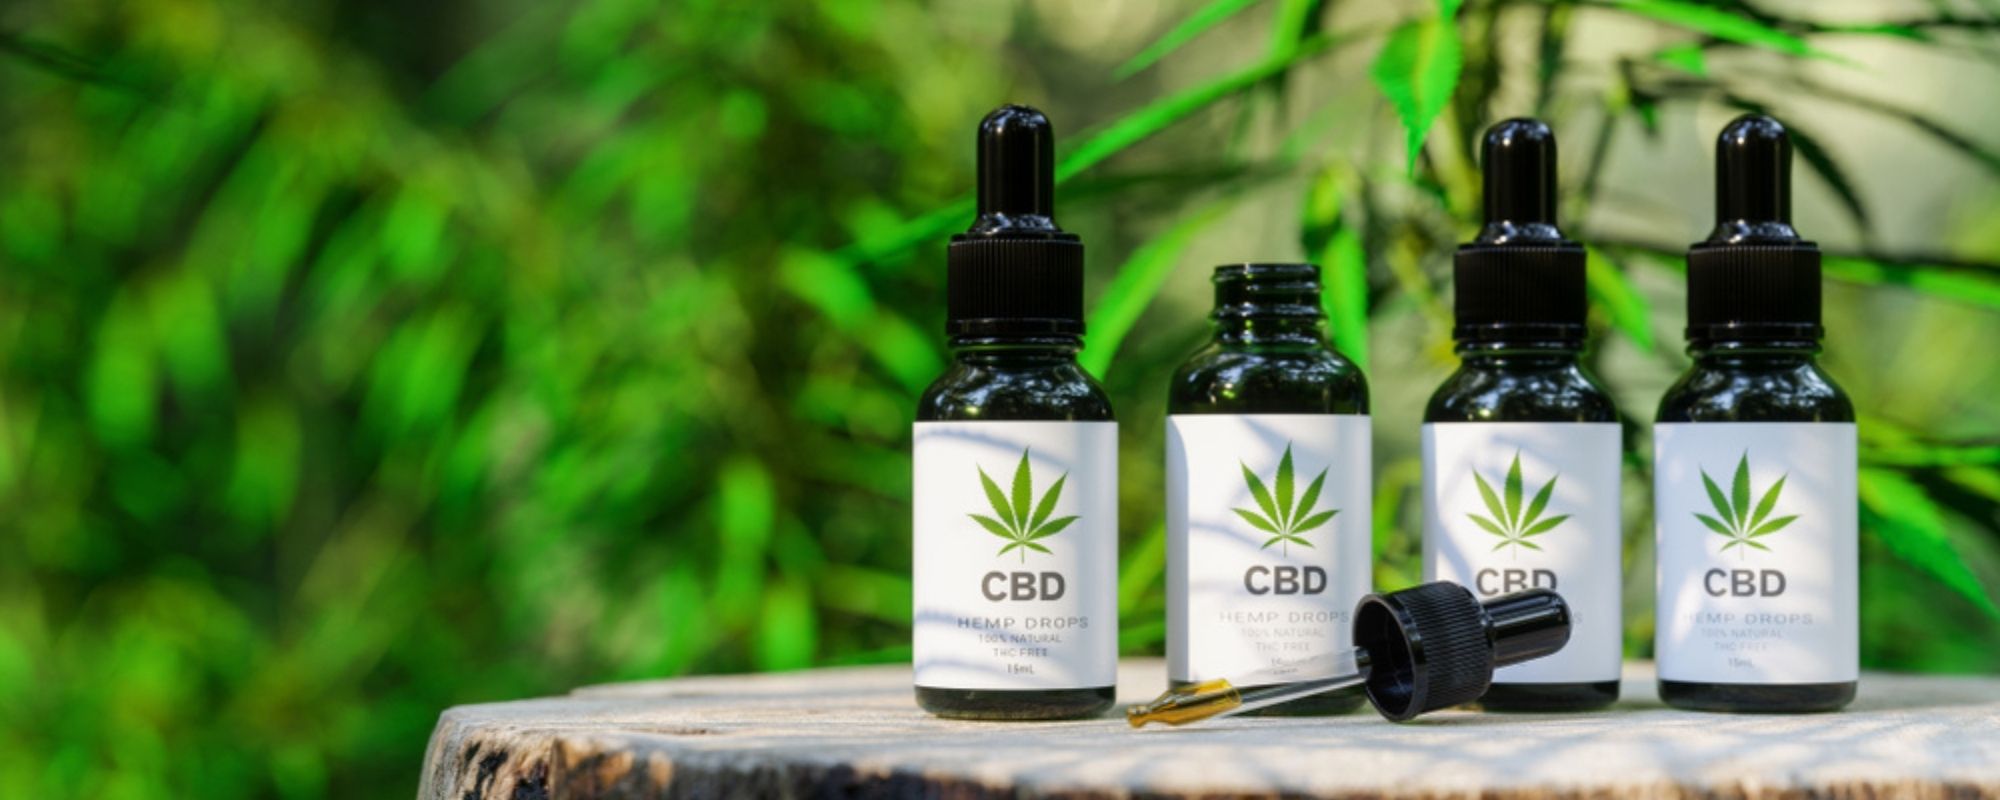 Are You Getting CBD You Pay For? Here’s What Medical Marijuana Doctor Say